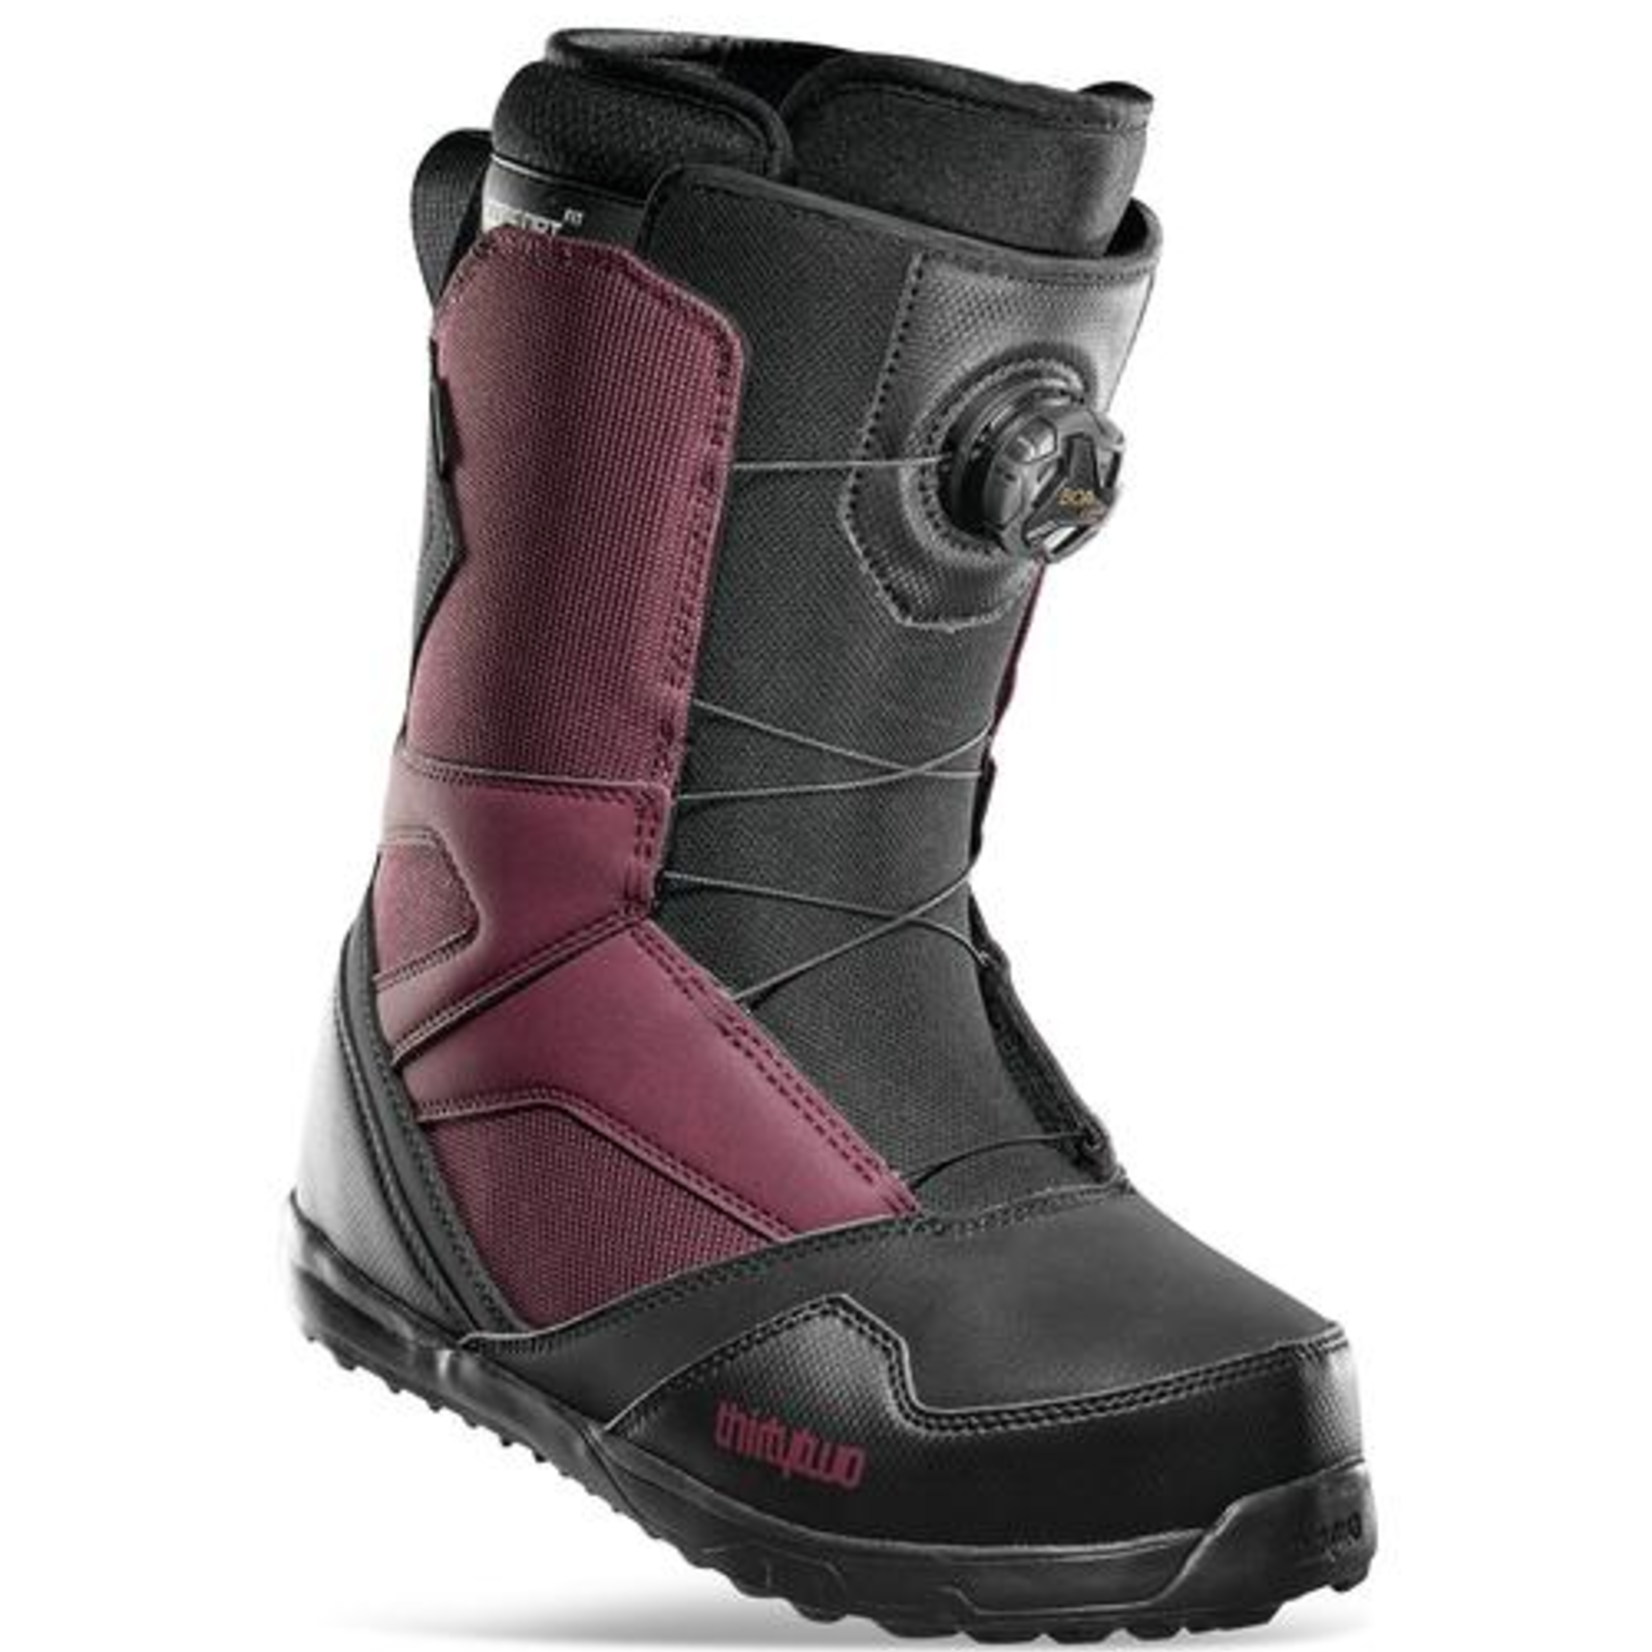 THIRTY TWO MEN'S THIRTYTWO STW BOA SNOWBOARD BOOTS 2022 - SALE